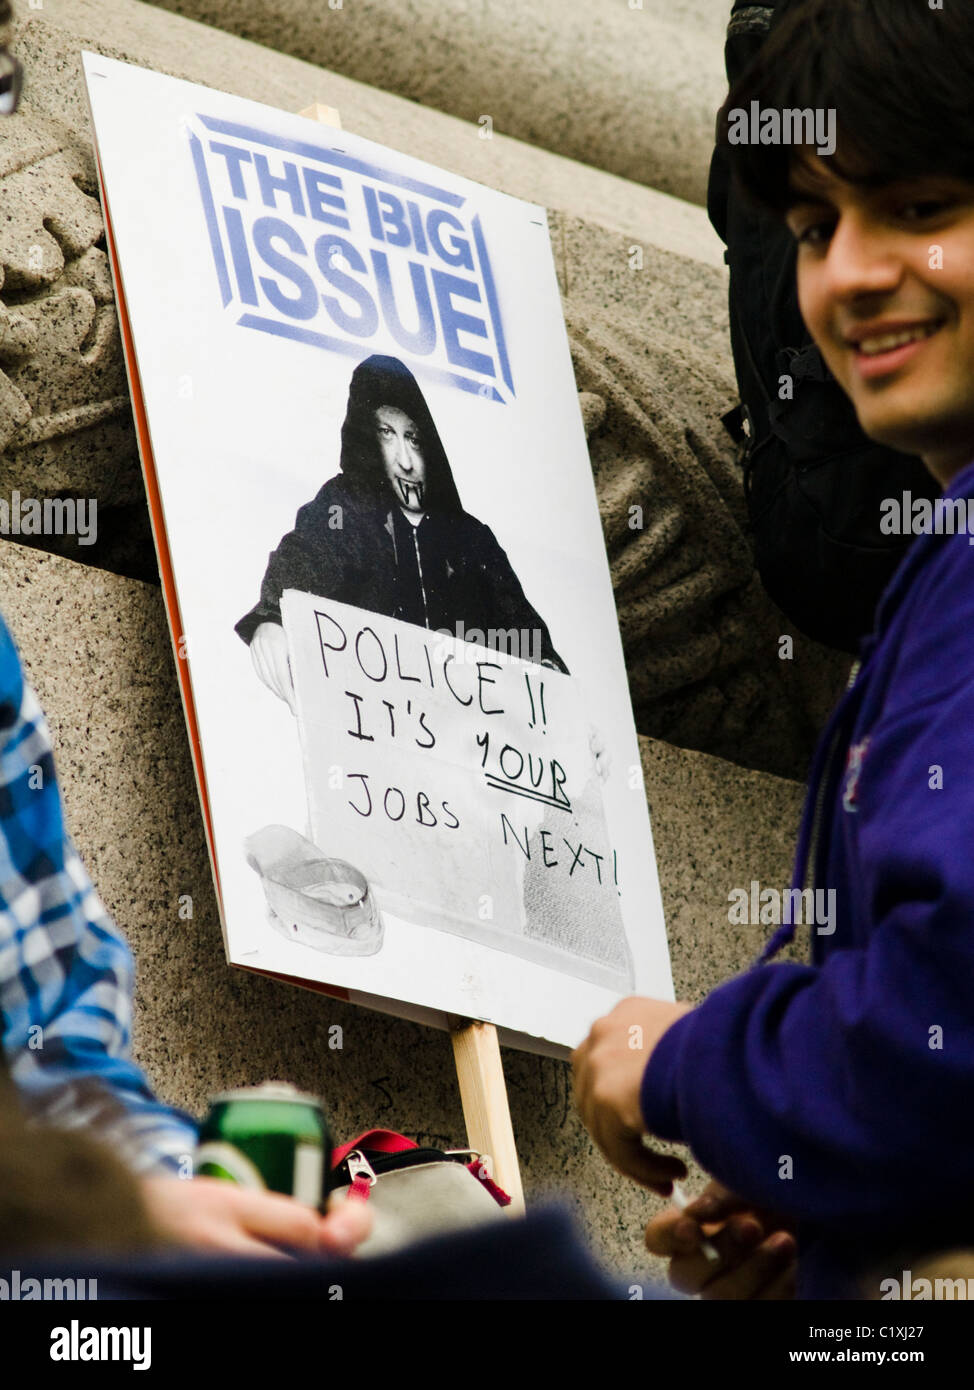 A protester puts the finishing touches to his placard during the TUC public spending cuts protest on 26th March 2011 in London Stock Photo